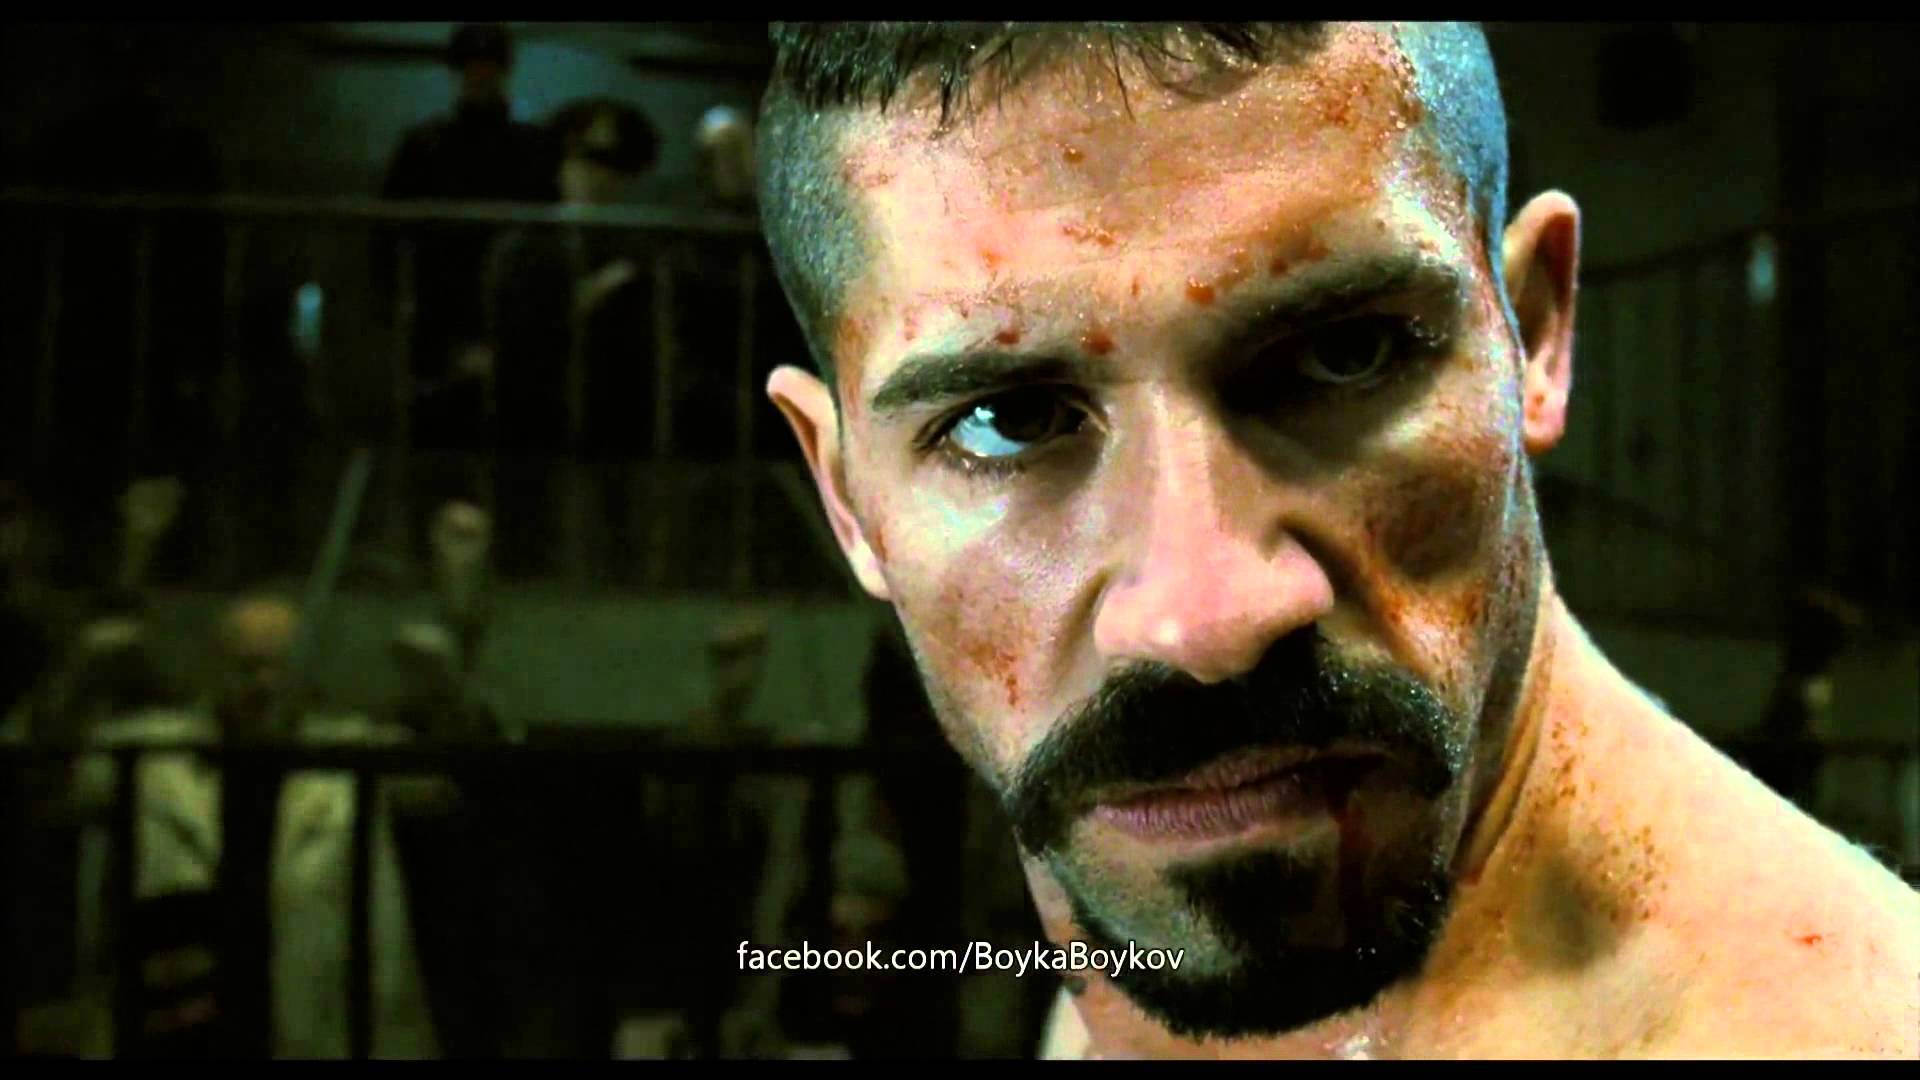 Famous fighter Scott Adkins wallpapers and images - wallpapers